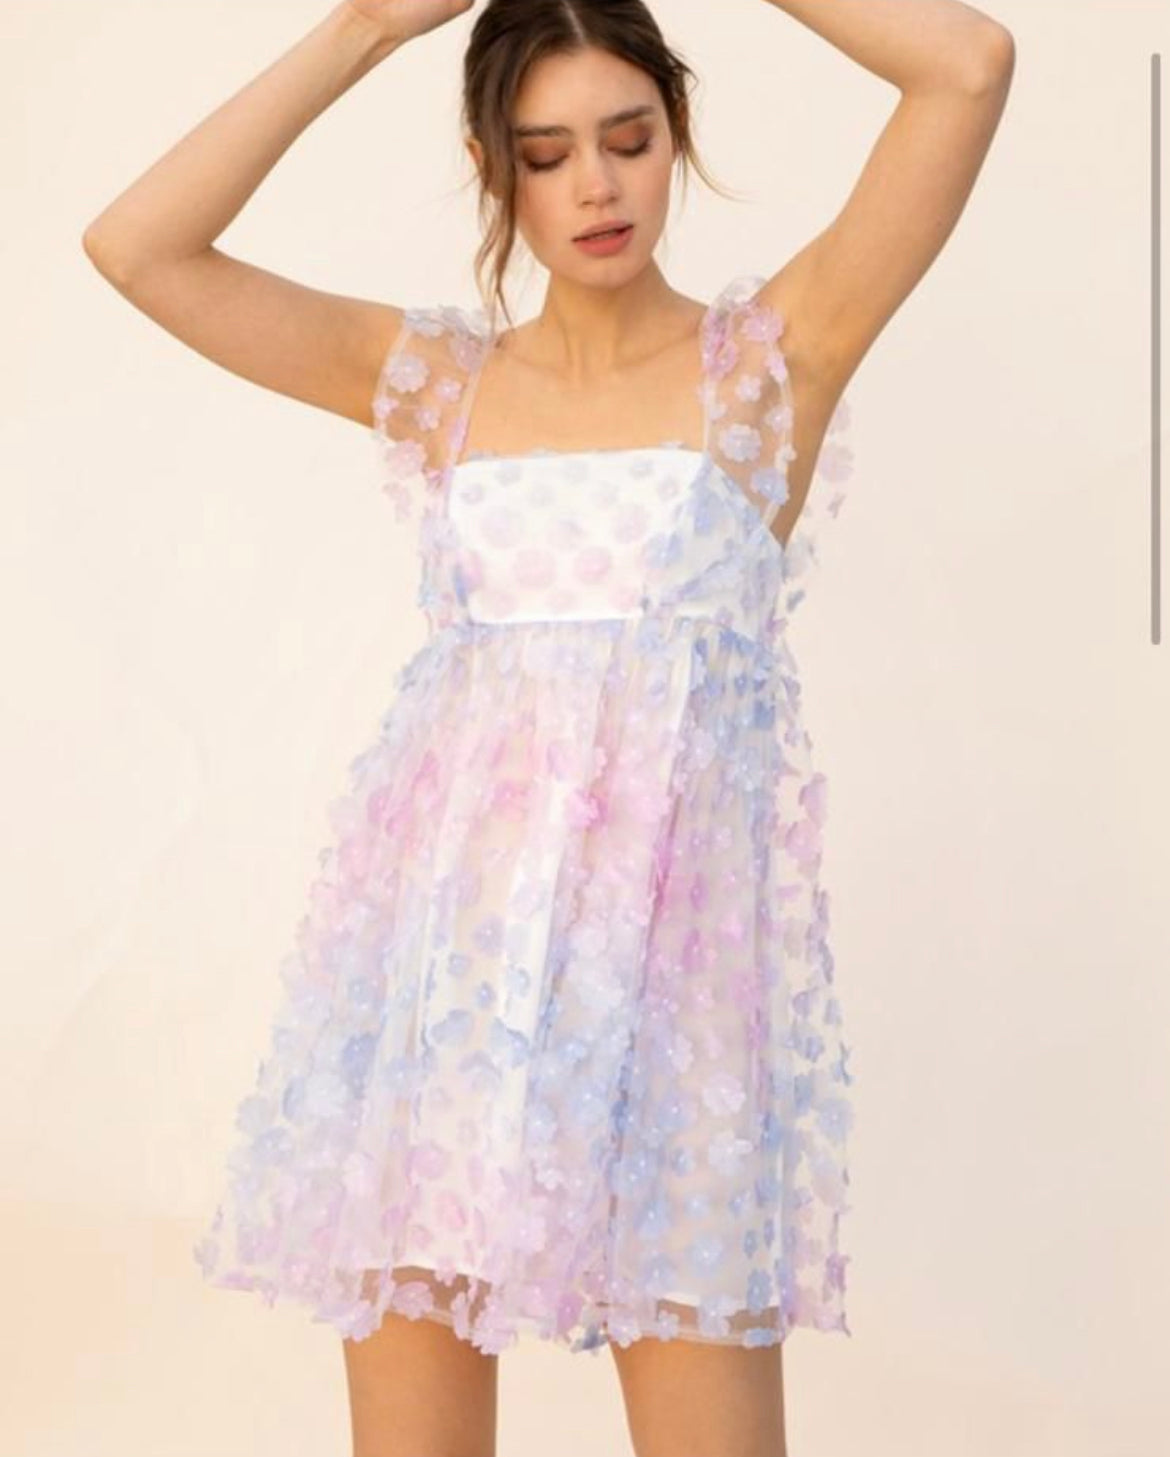 Cotton Candy 3-D Flowers Tulle Dress